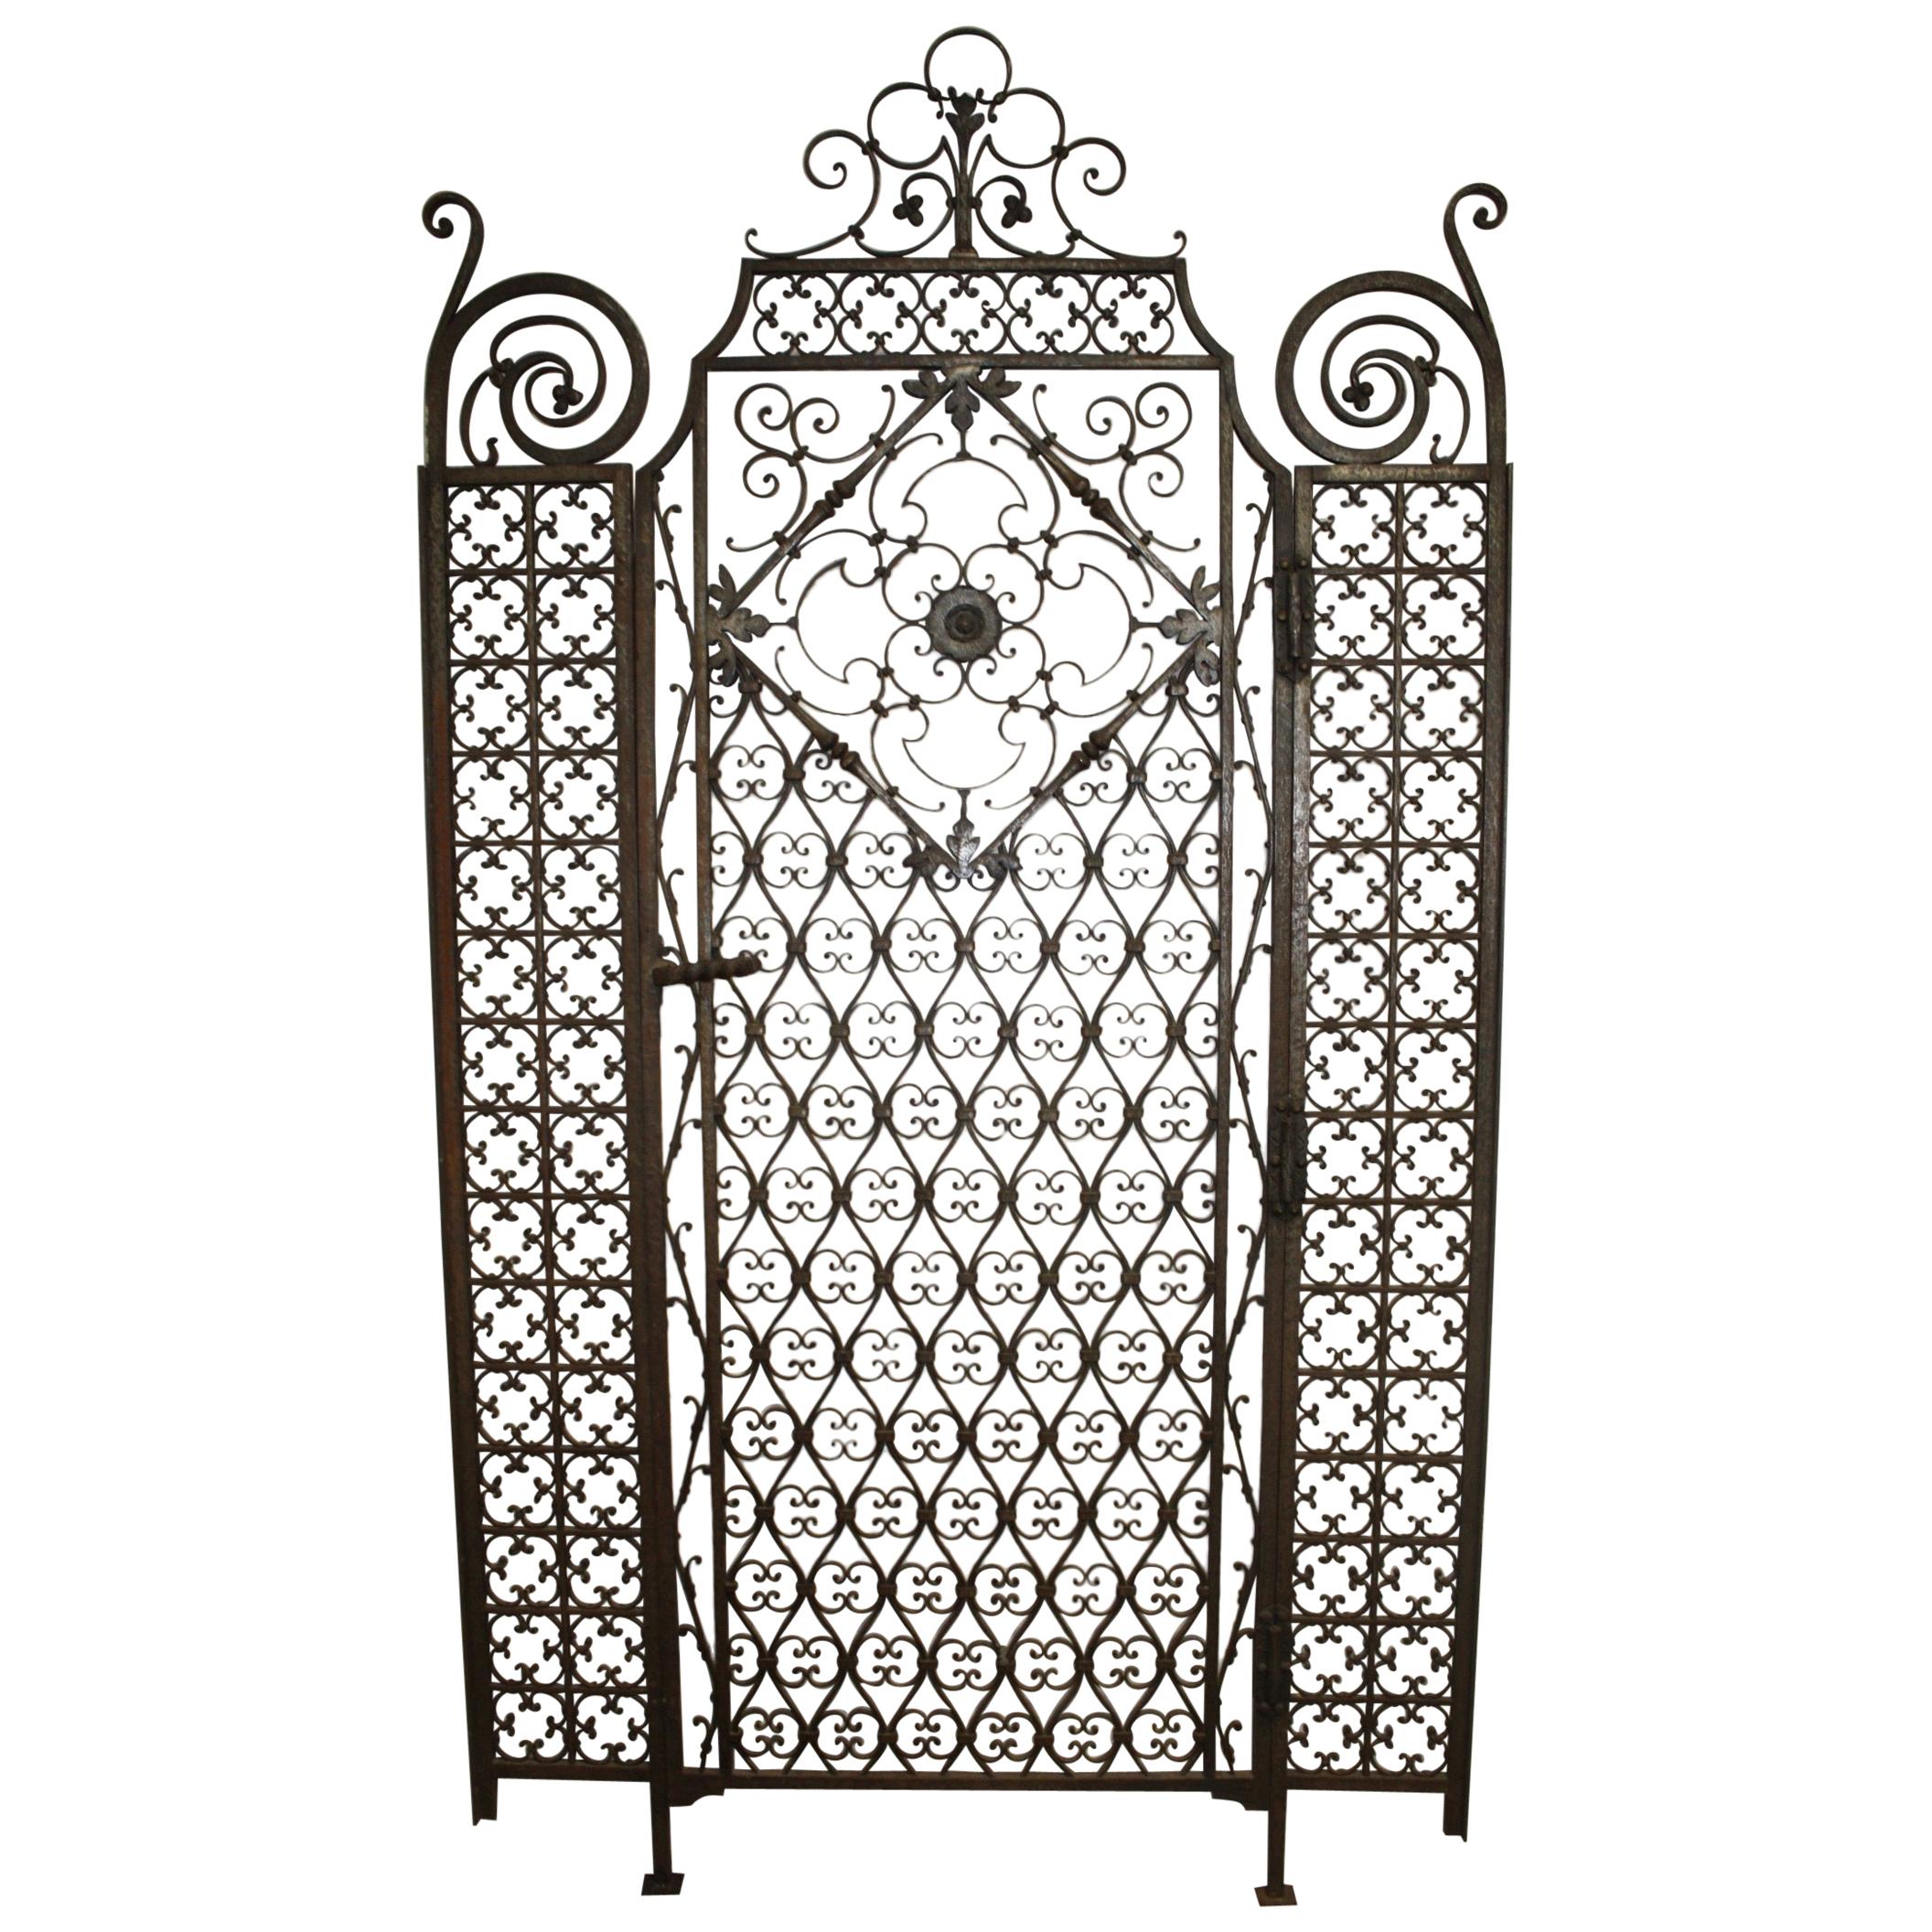 Sublime 19th Century French Iron Door Gate